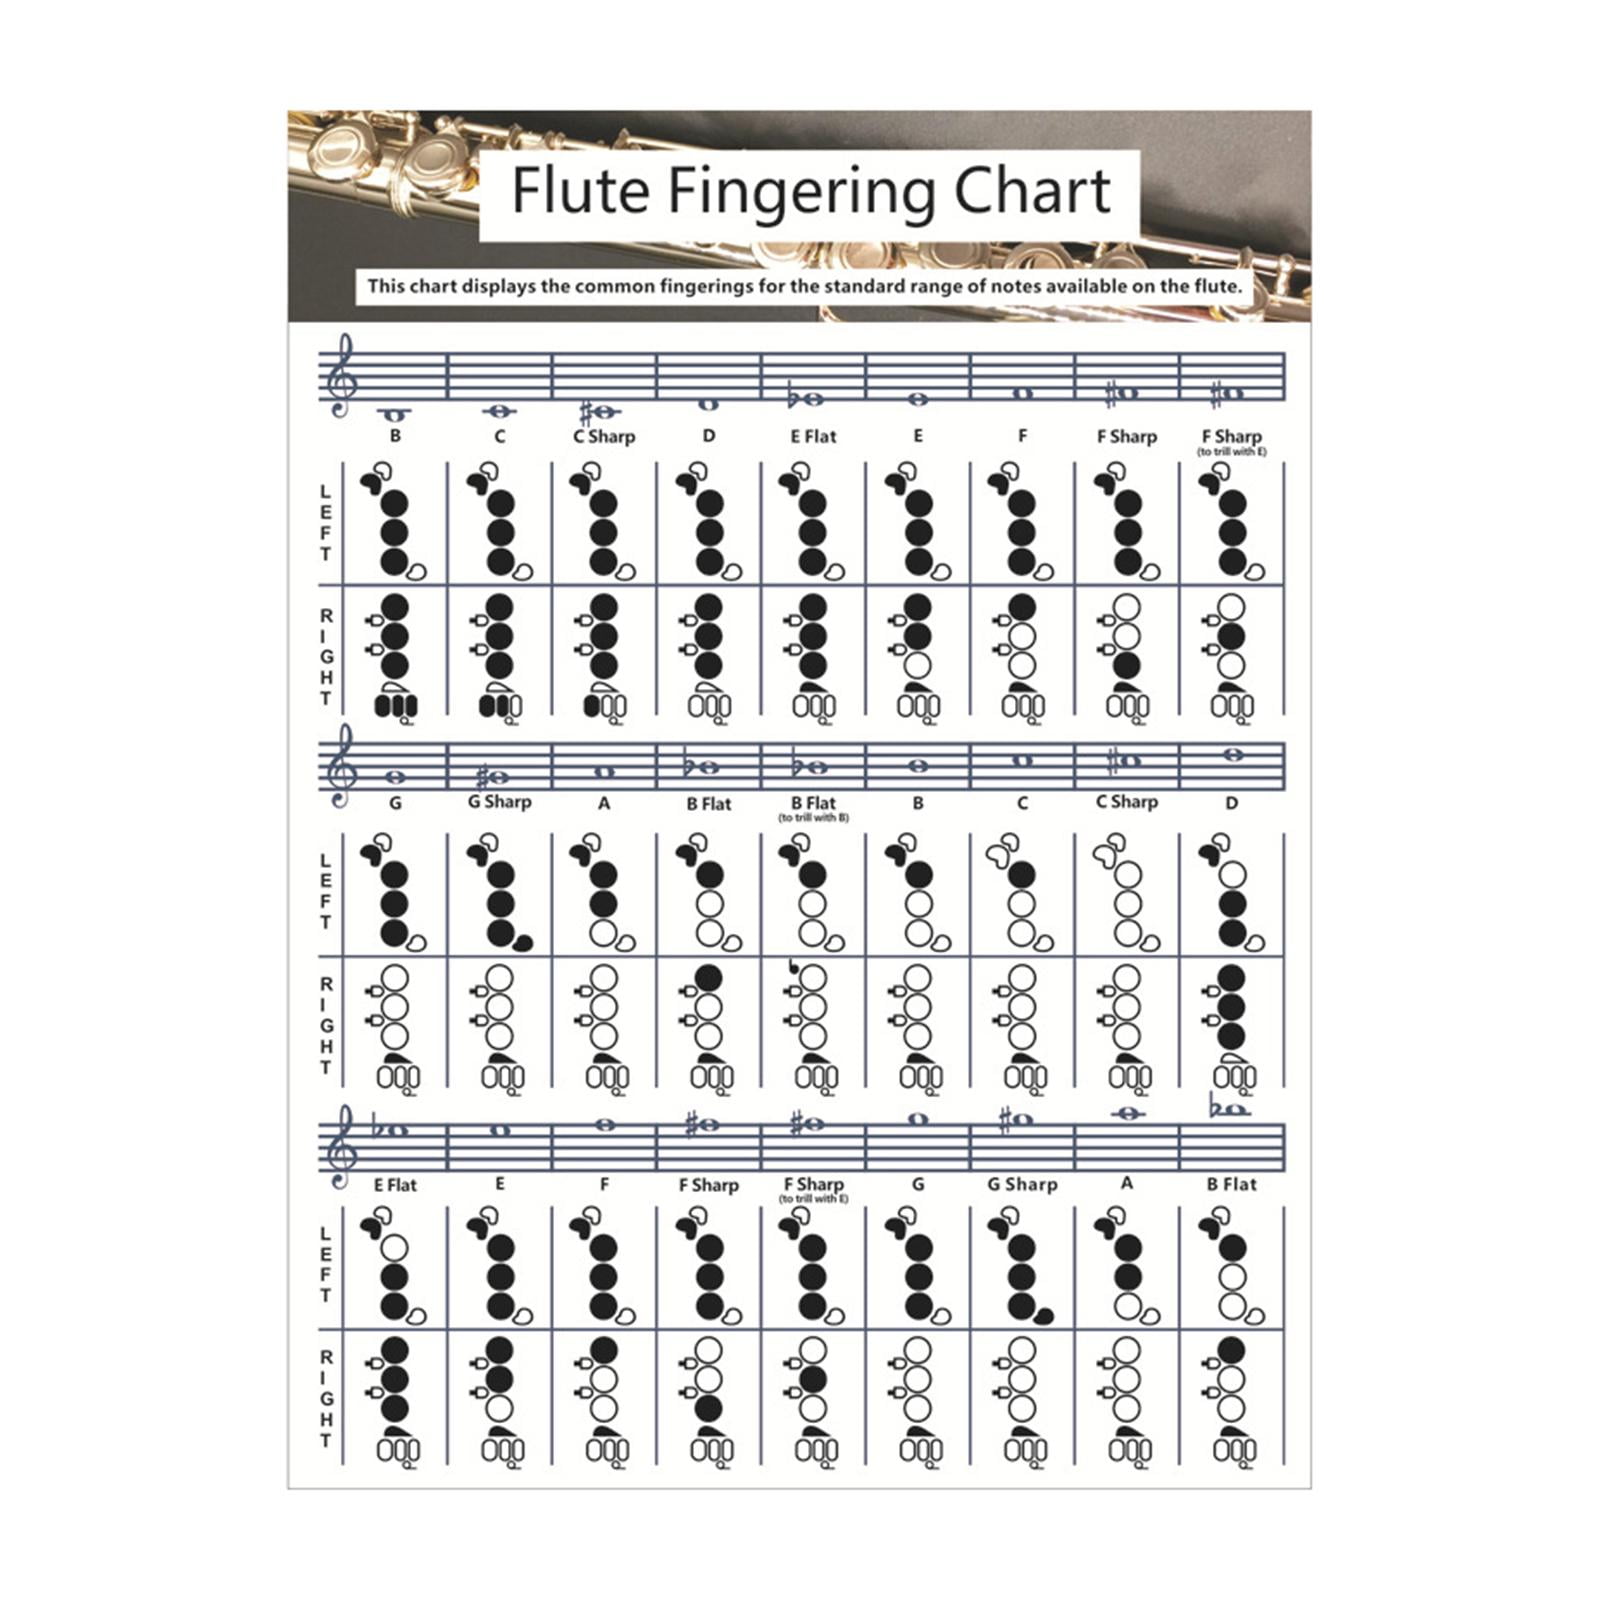 Useful Flute Fingering Chart Poster Practical Instrument Accessories